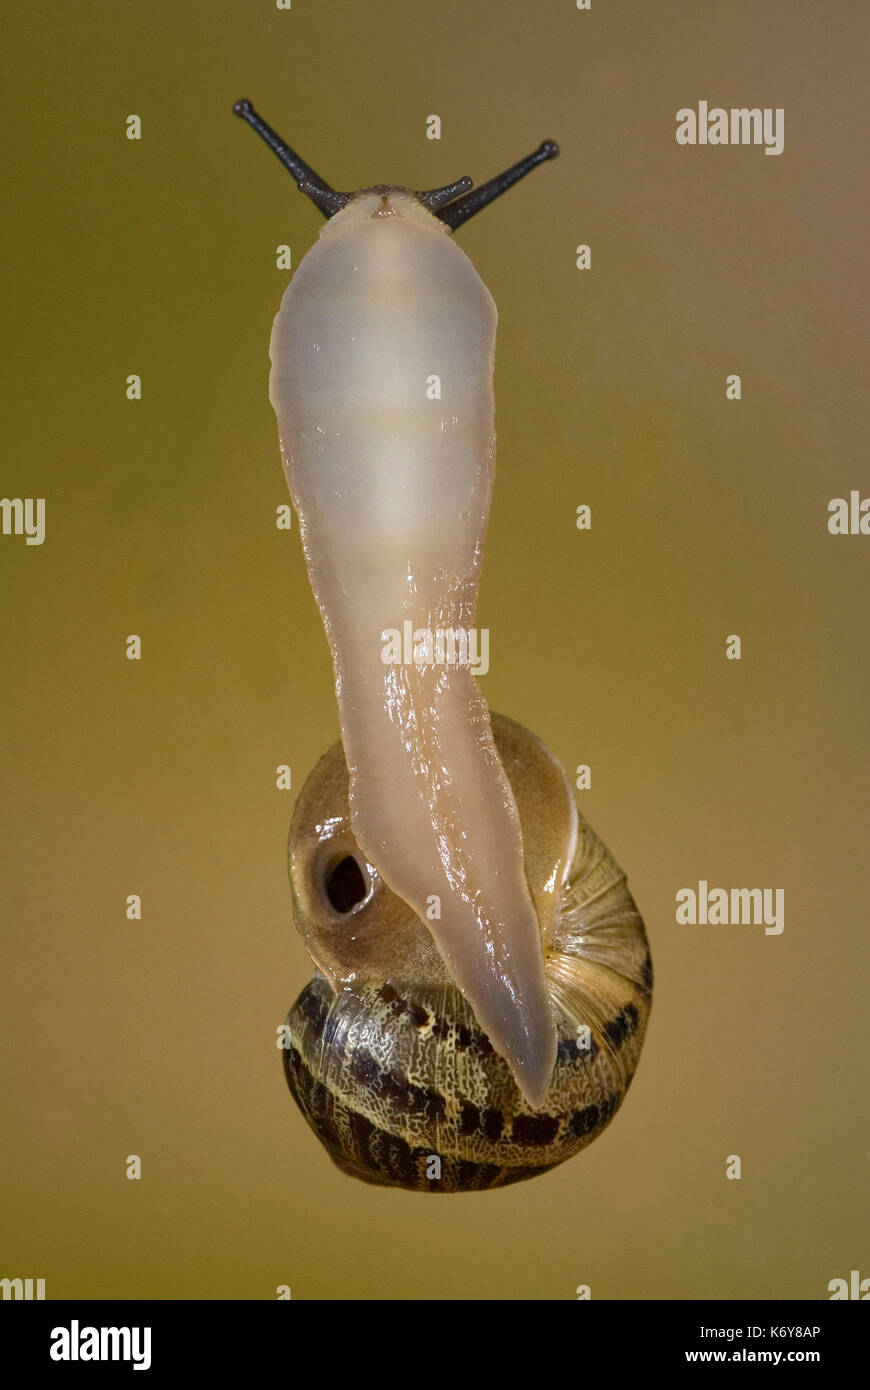 Garden Snail, Helix aspersa, on glass showing underneath and foot, pneumatophore, hole in mantle used for respiration animal mollusc nature night pest Stock Photo